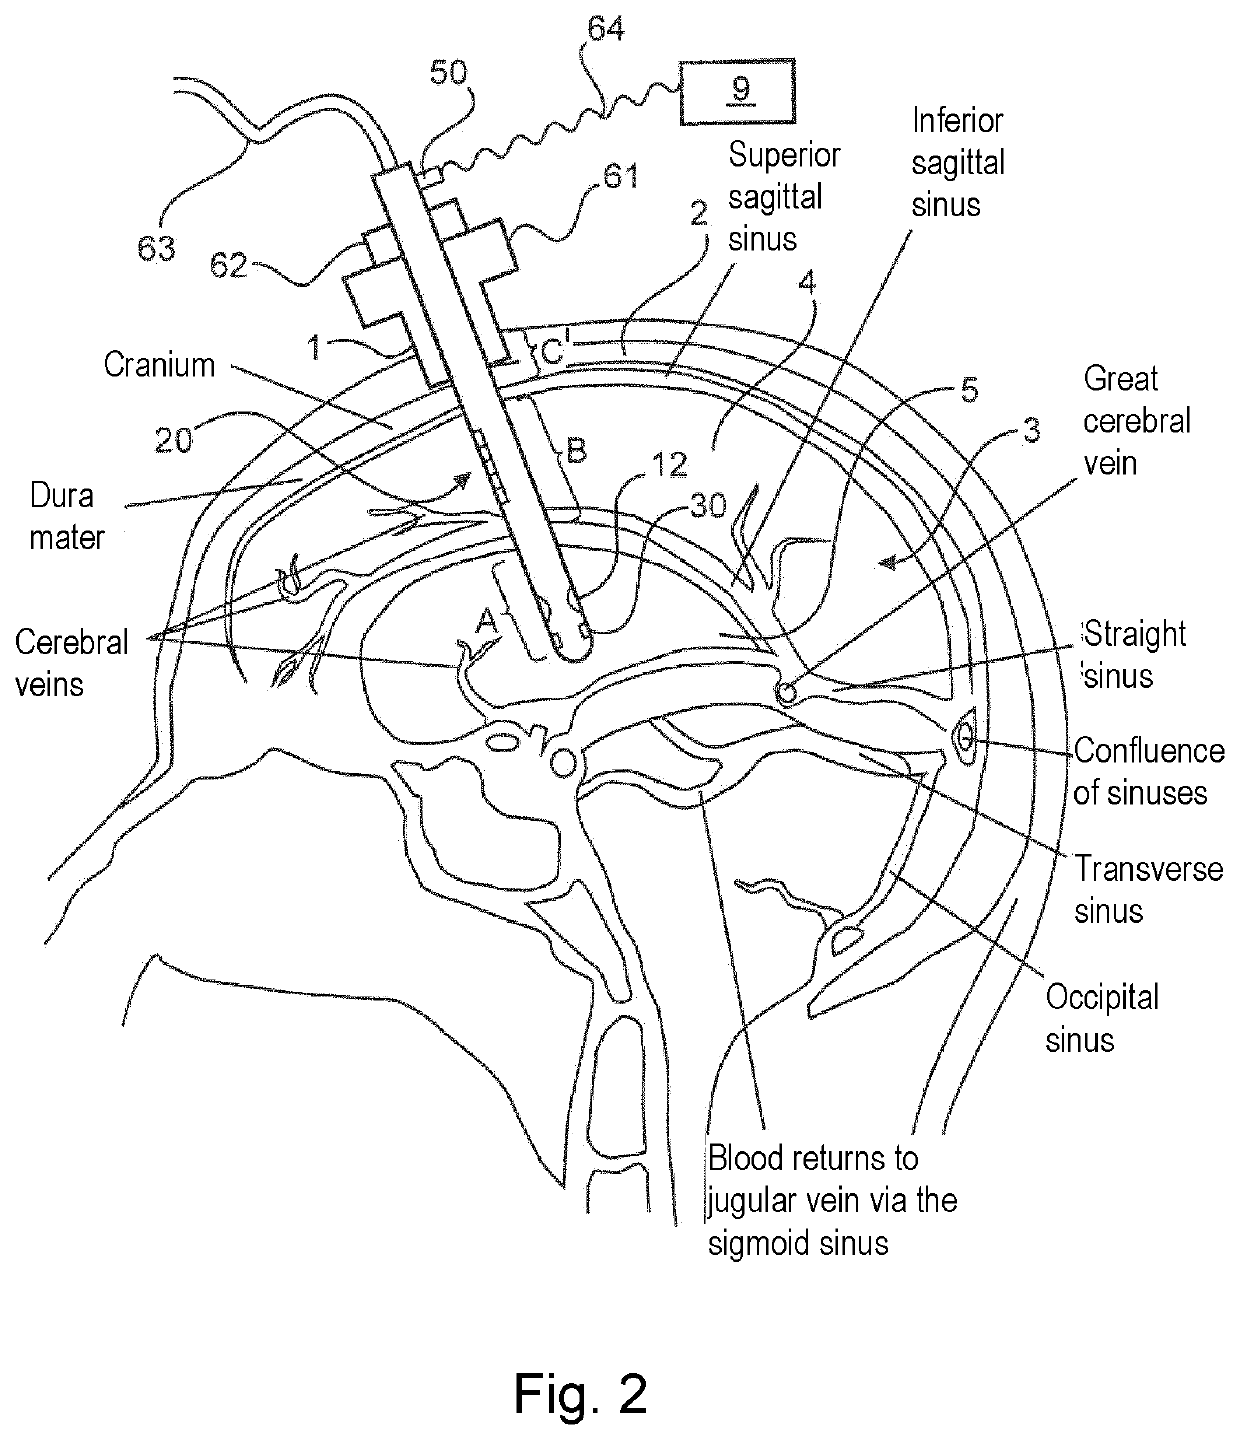 Device for drainage of the brain